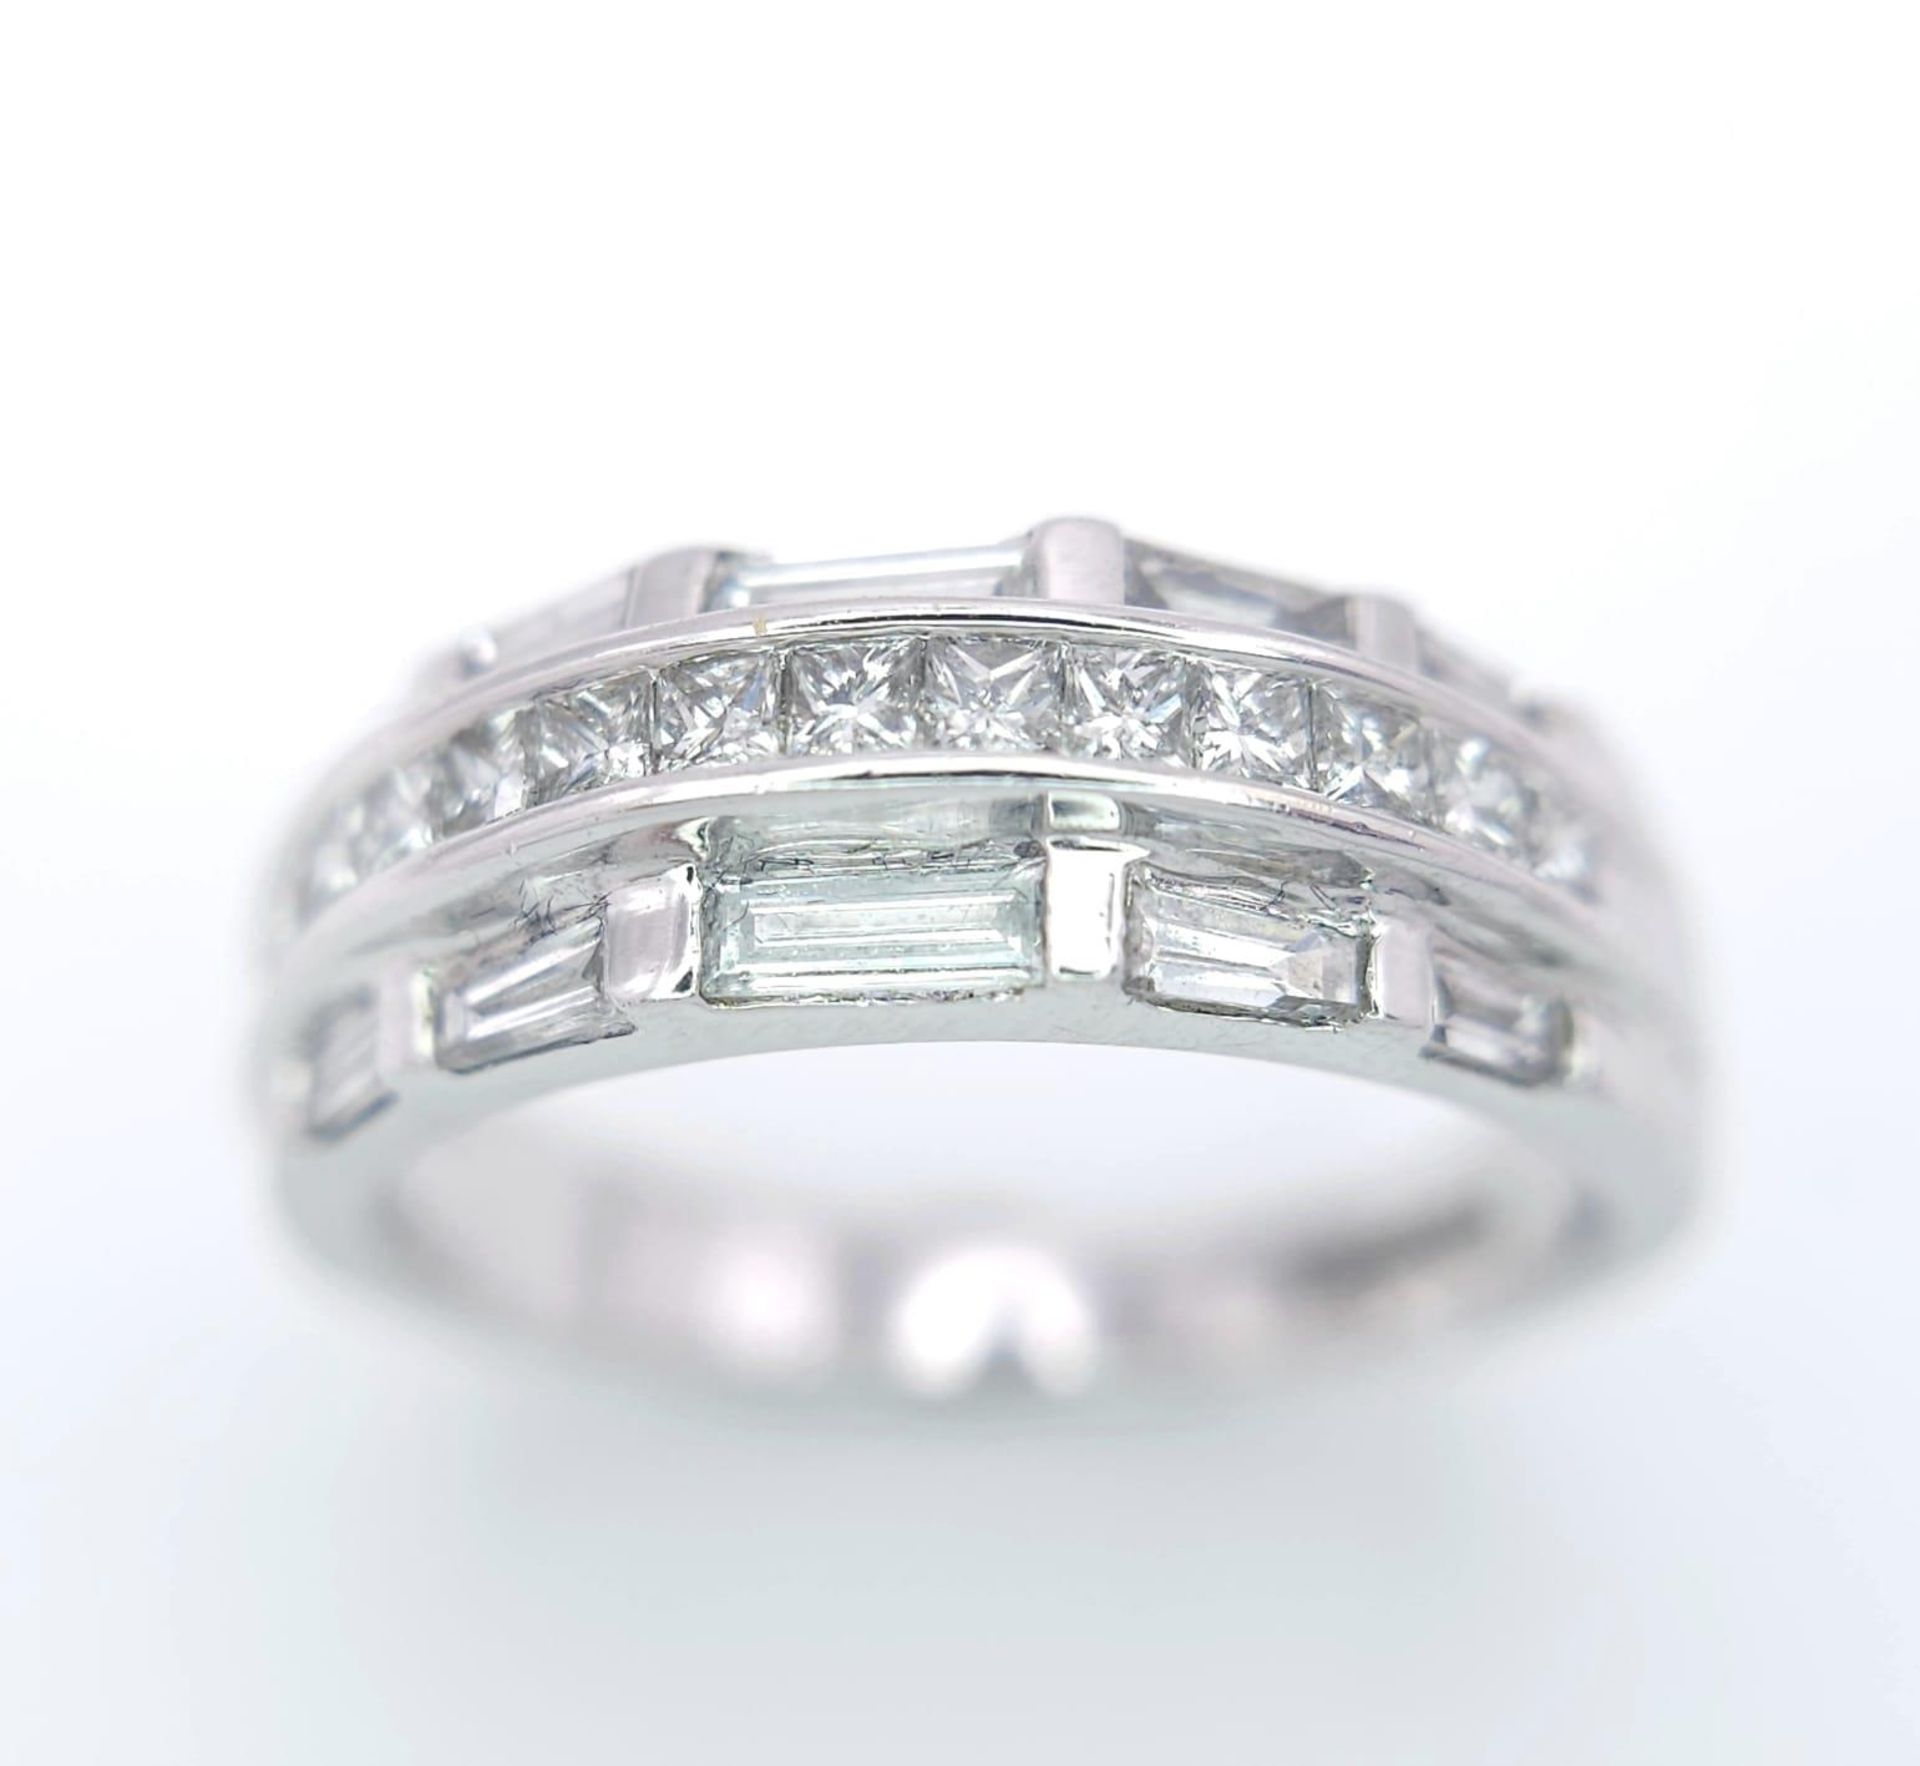 AN 18K WHITE GOLD DIAMOND SET BAND RING - 3 ROWS OF 1CTW OF DIAMOND MIXTURE OF PRINCESS AND BAGUETTE